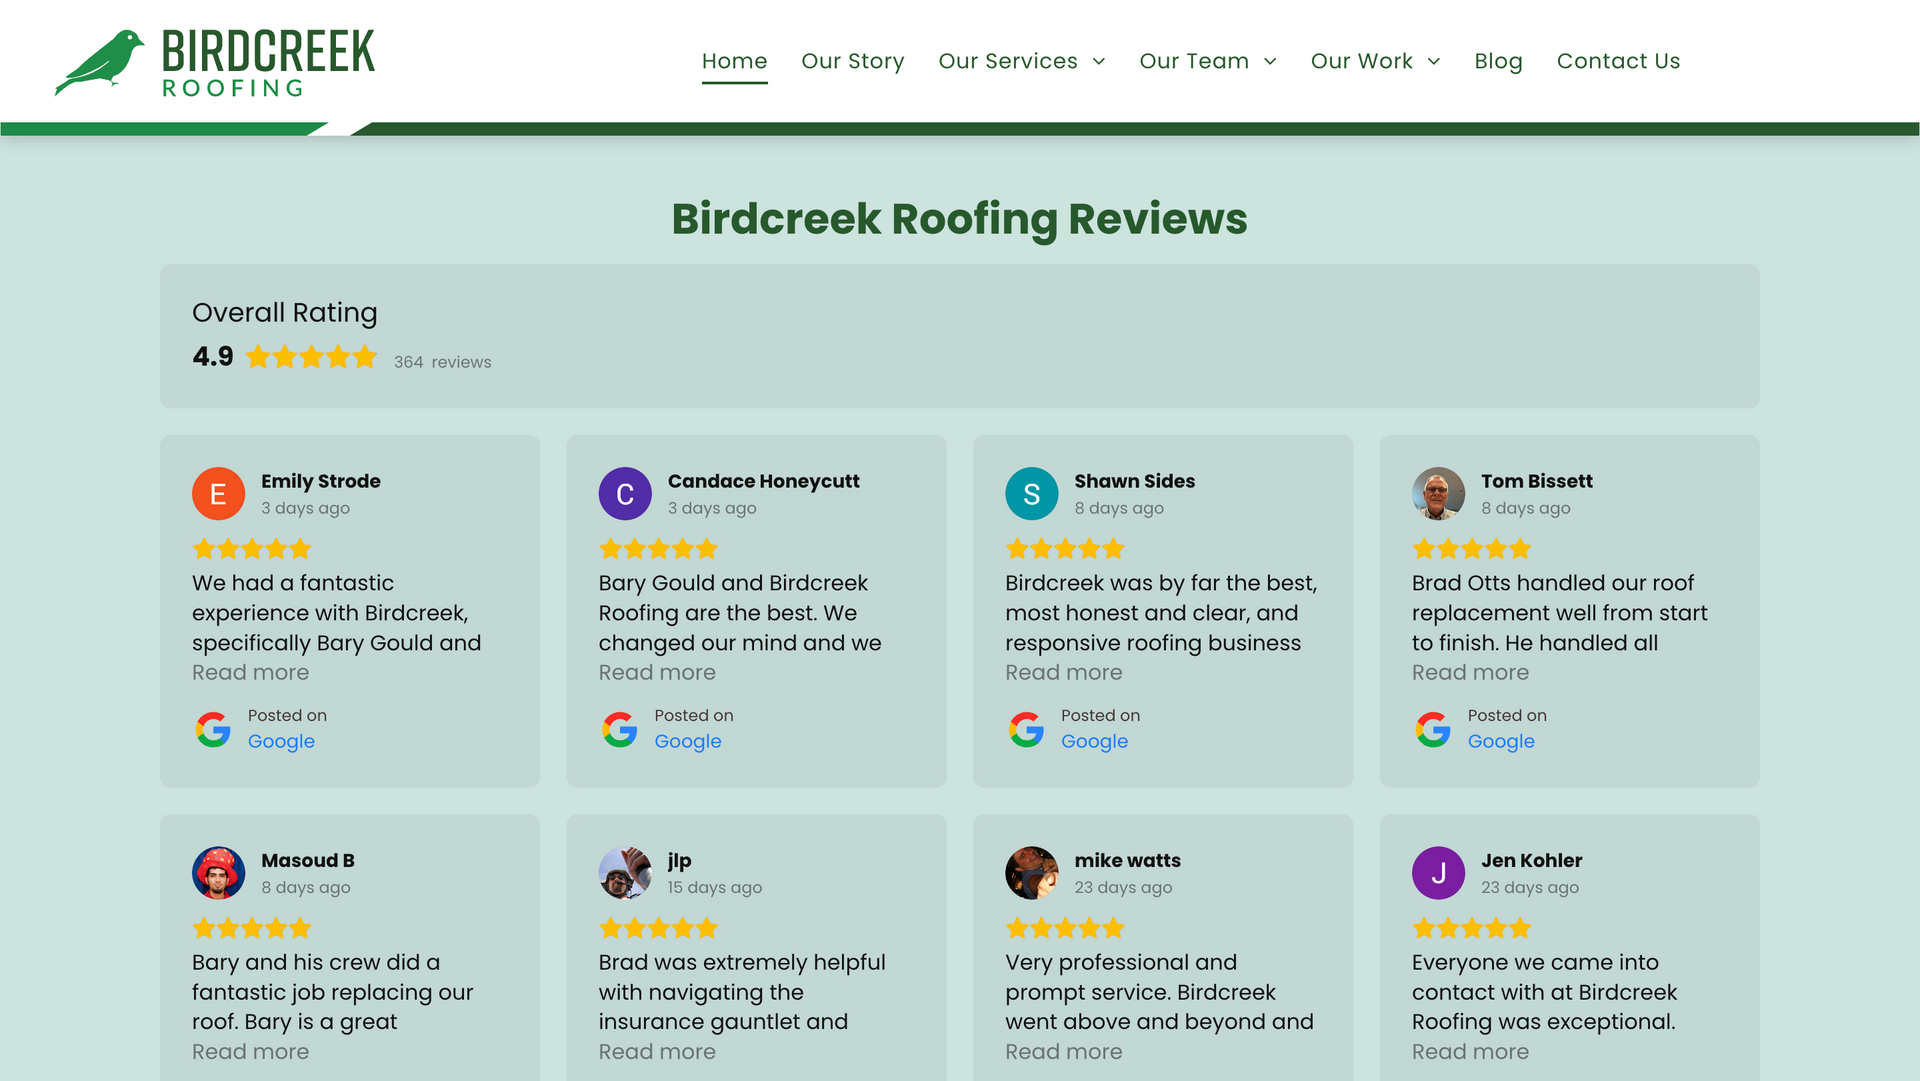 Screenshot of a website displaying roofing reviews